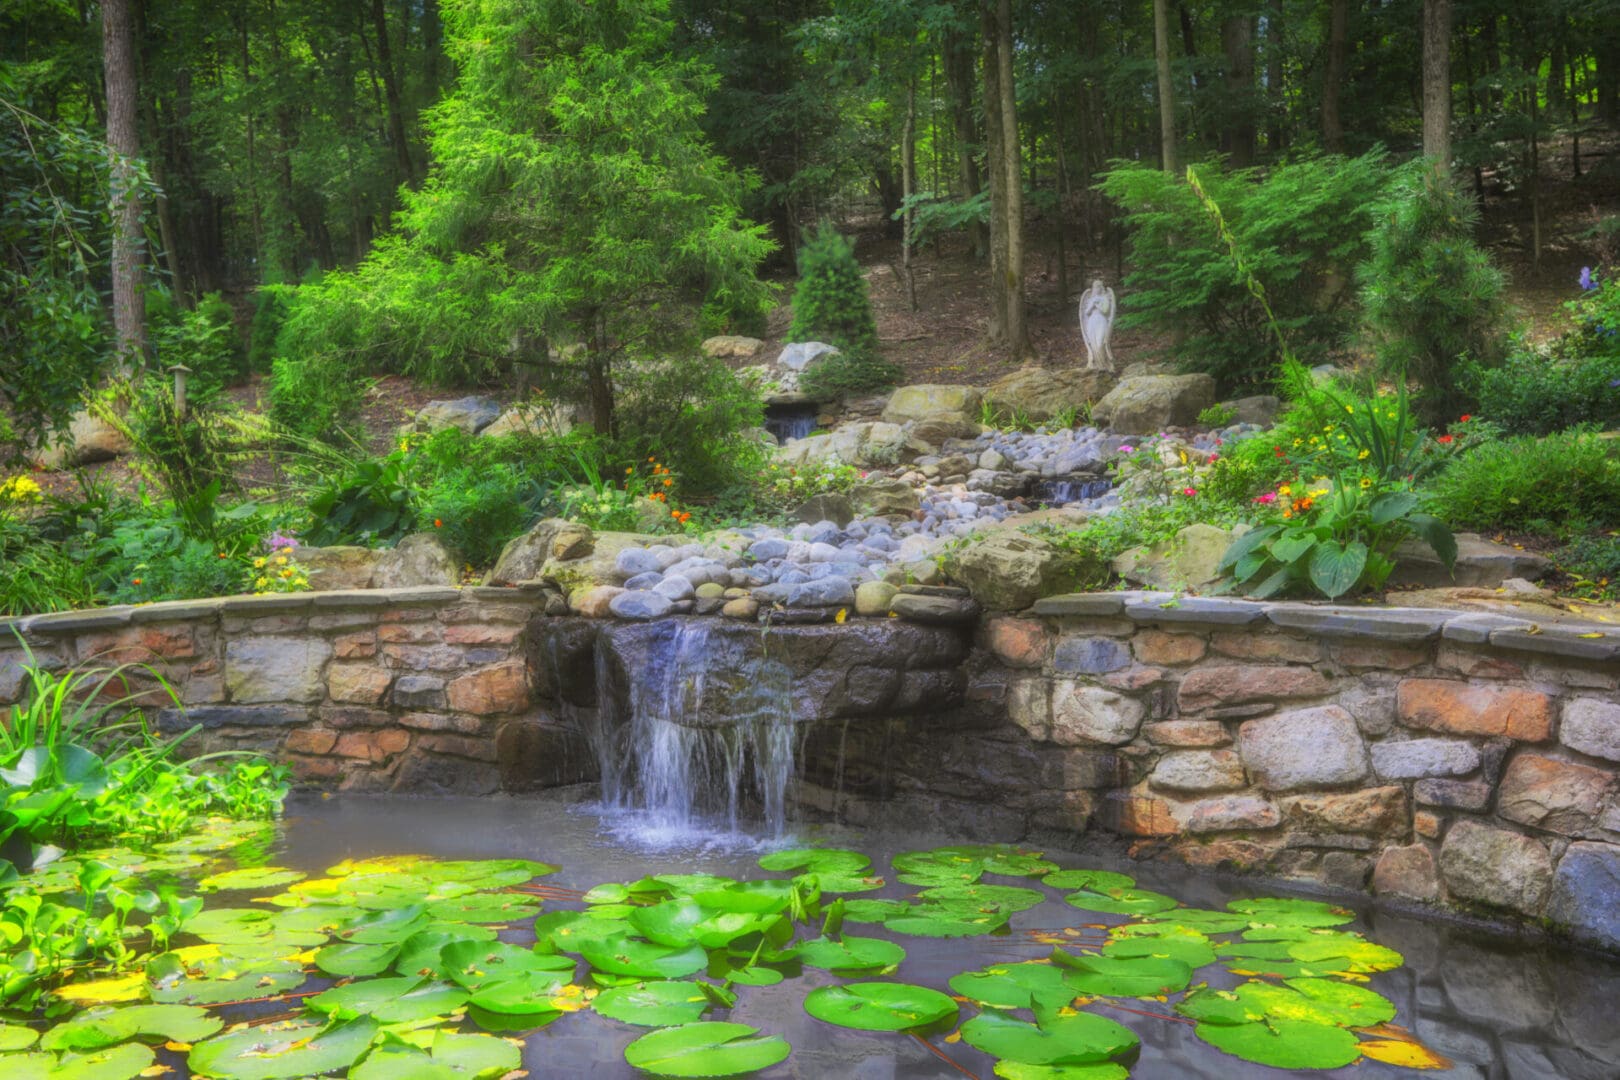 A forest pond with water features and lily pads.